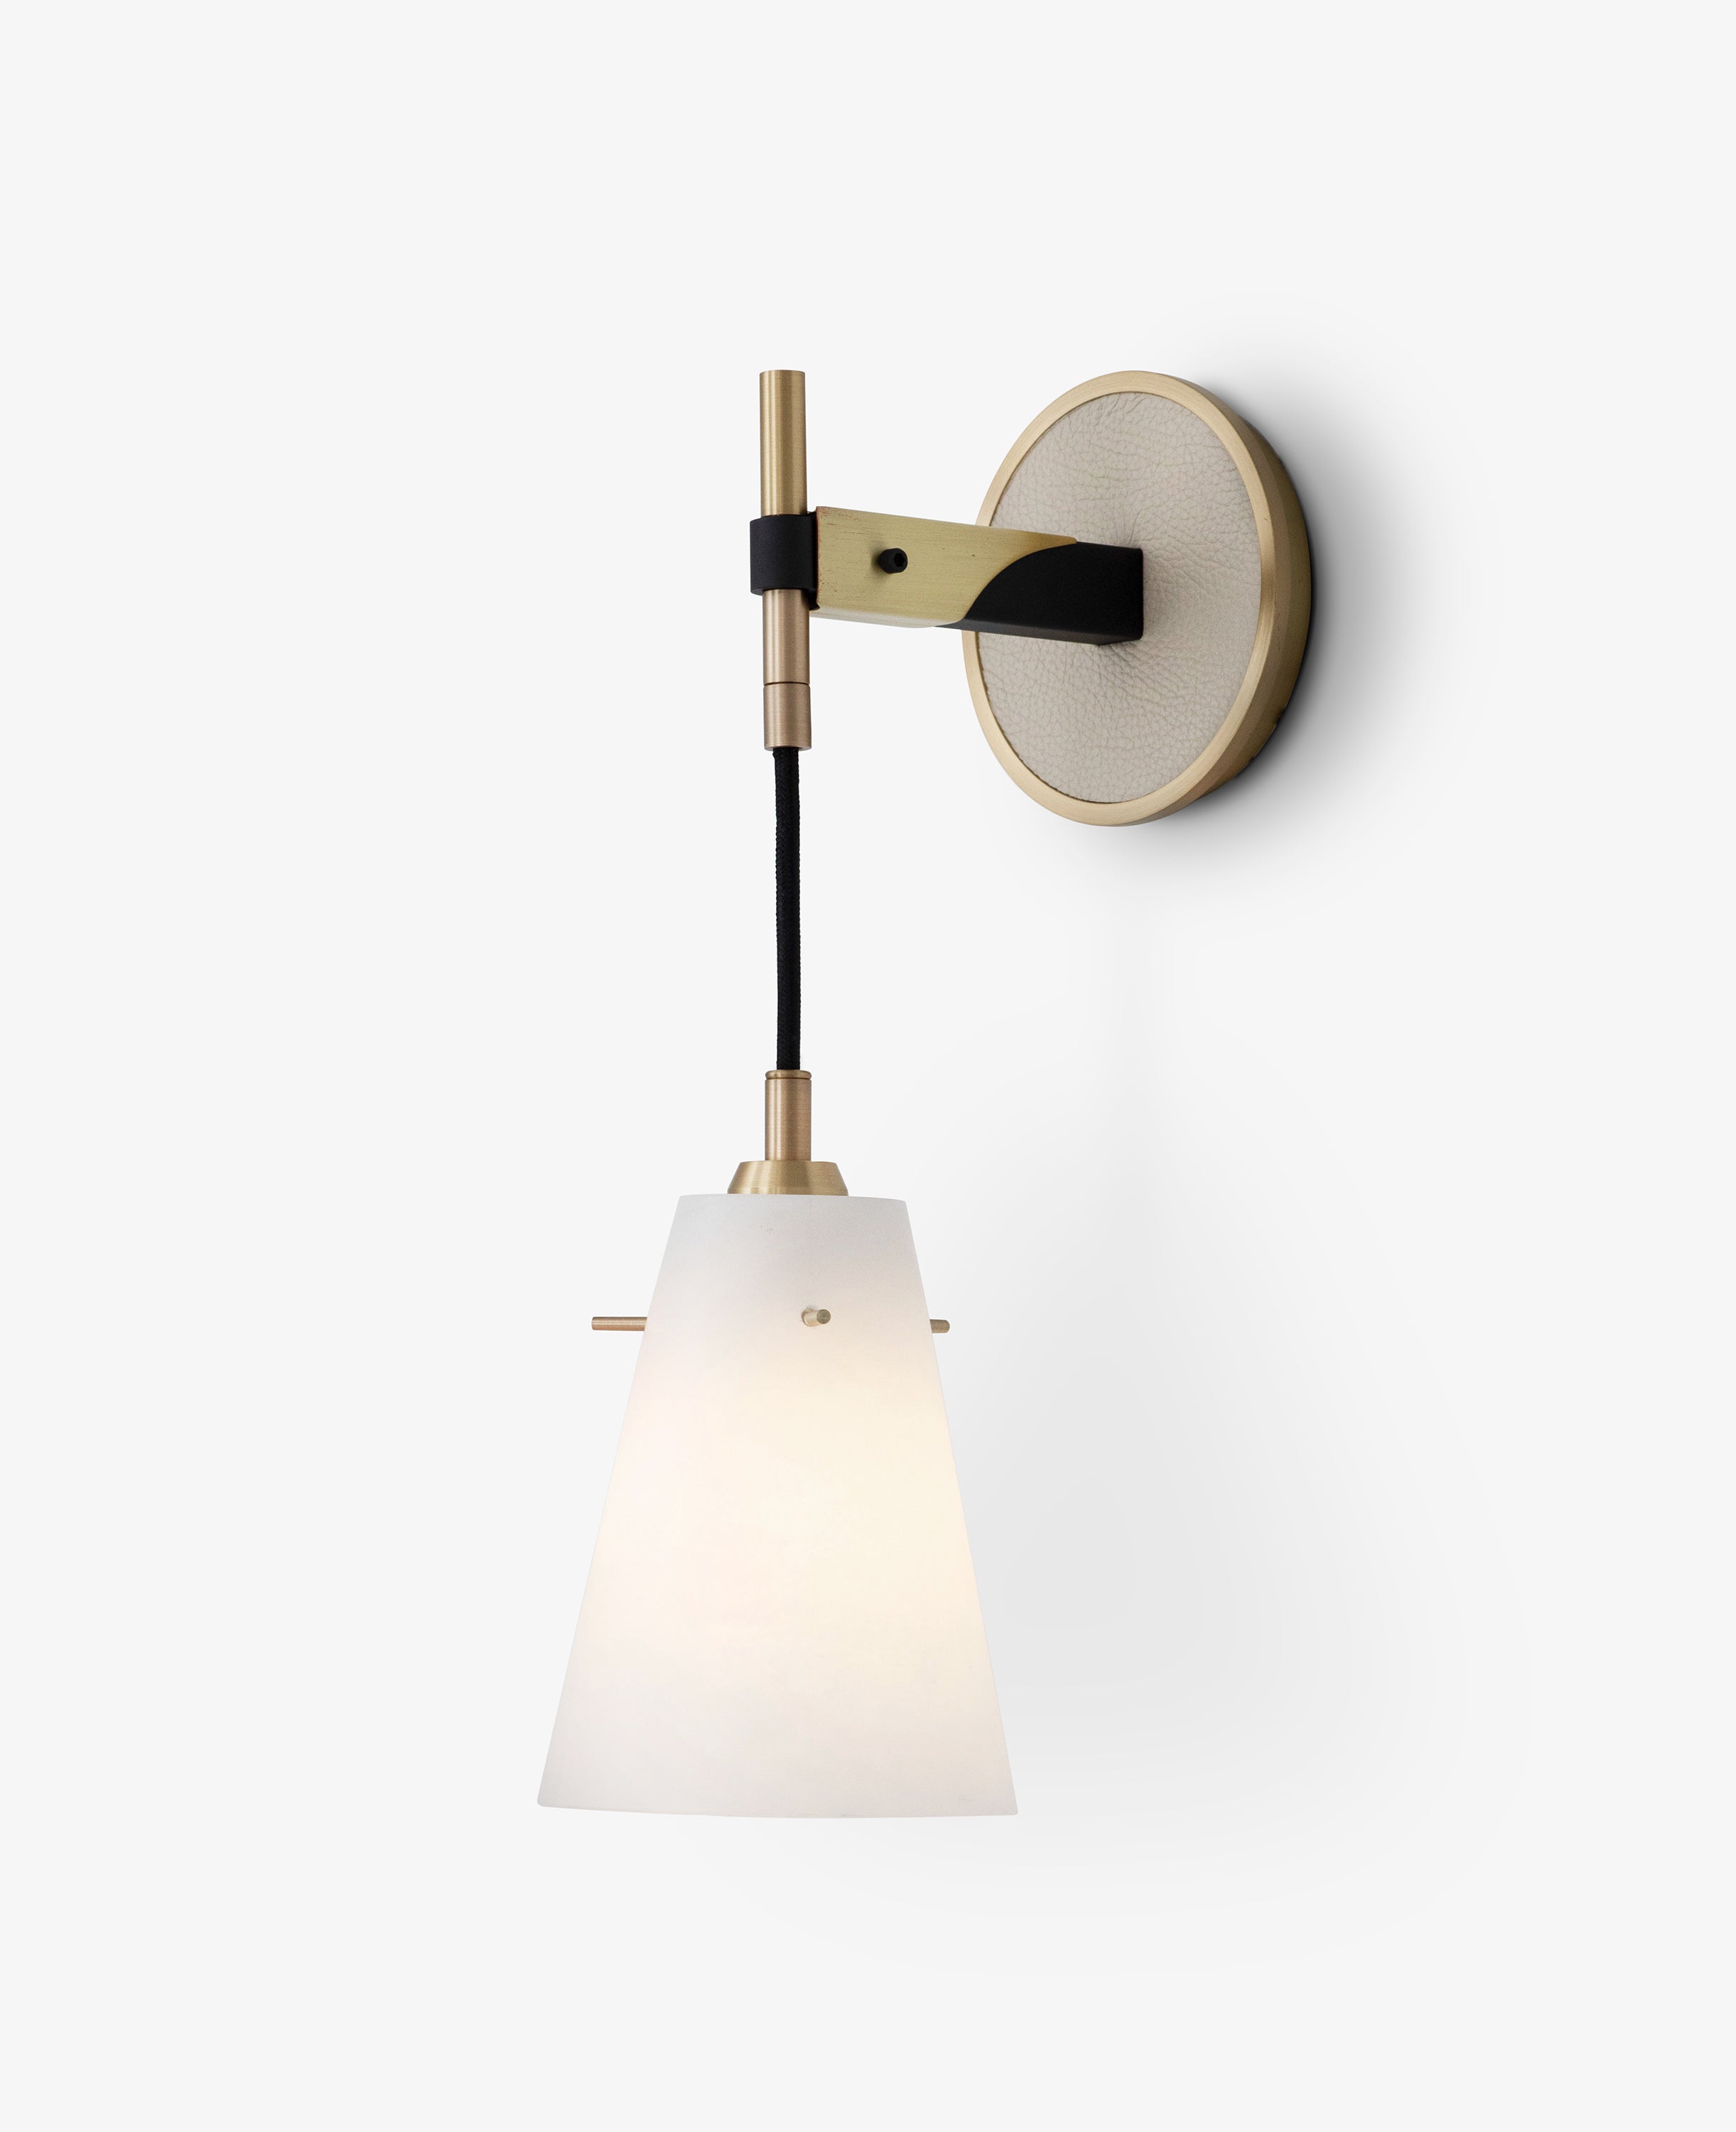 Light Antique Brass with Patinated Steel accents and Cream leather backplate